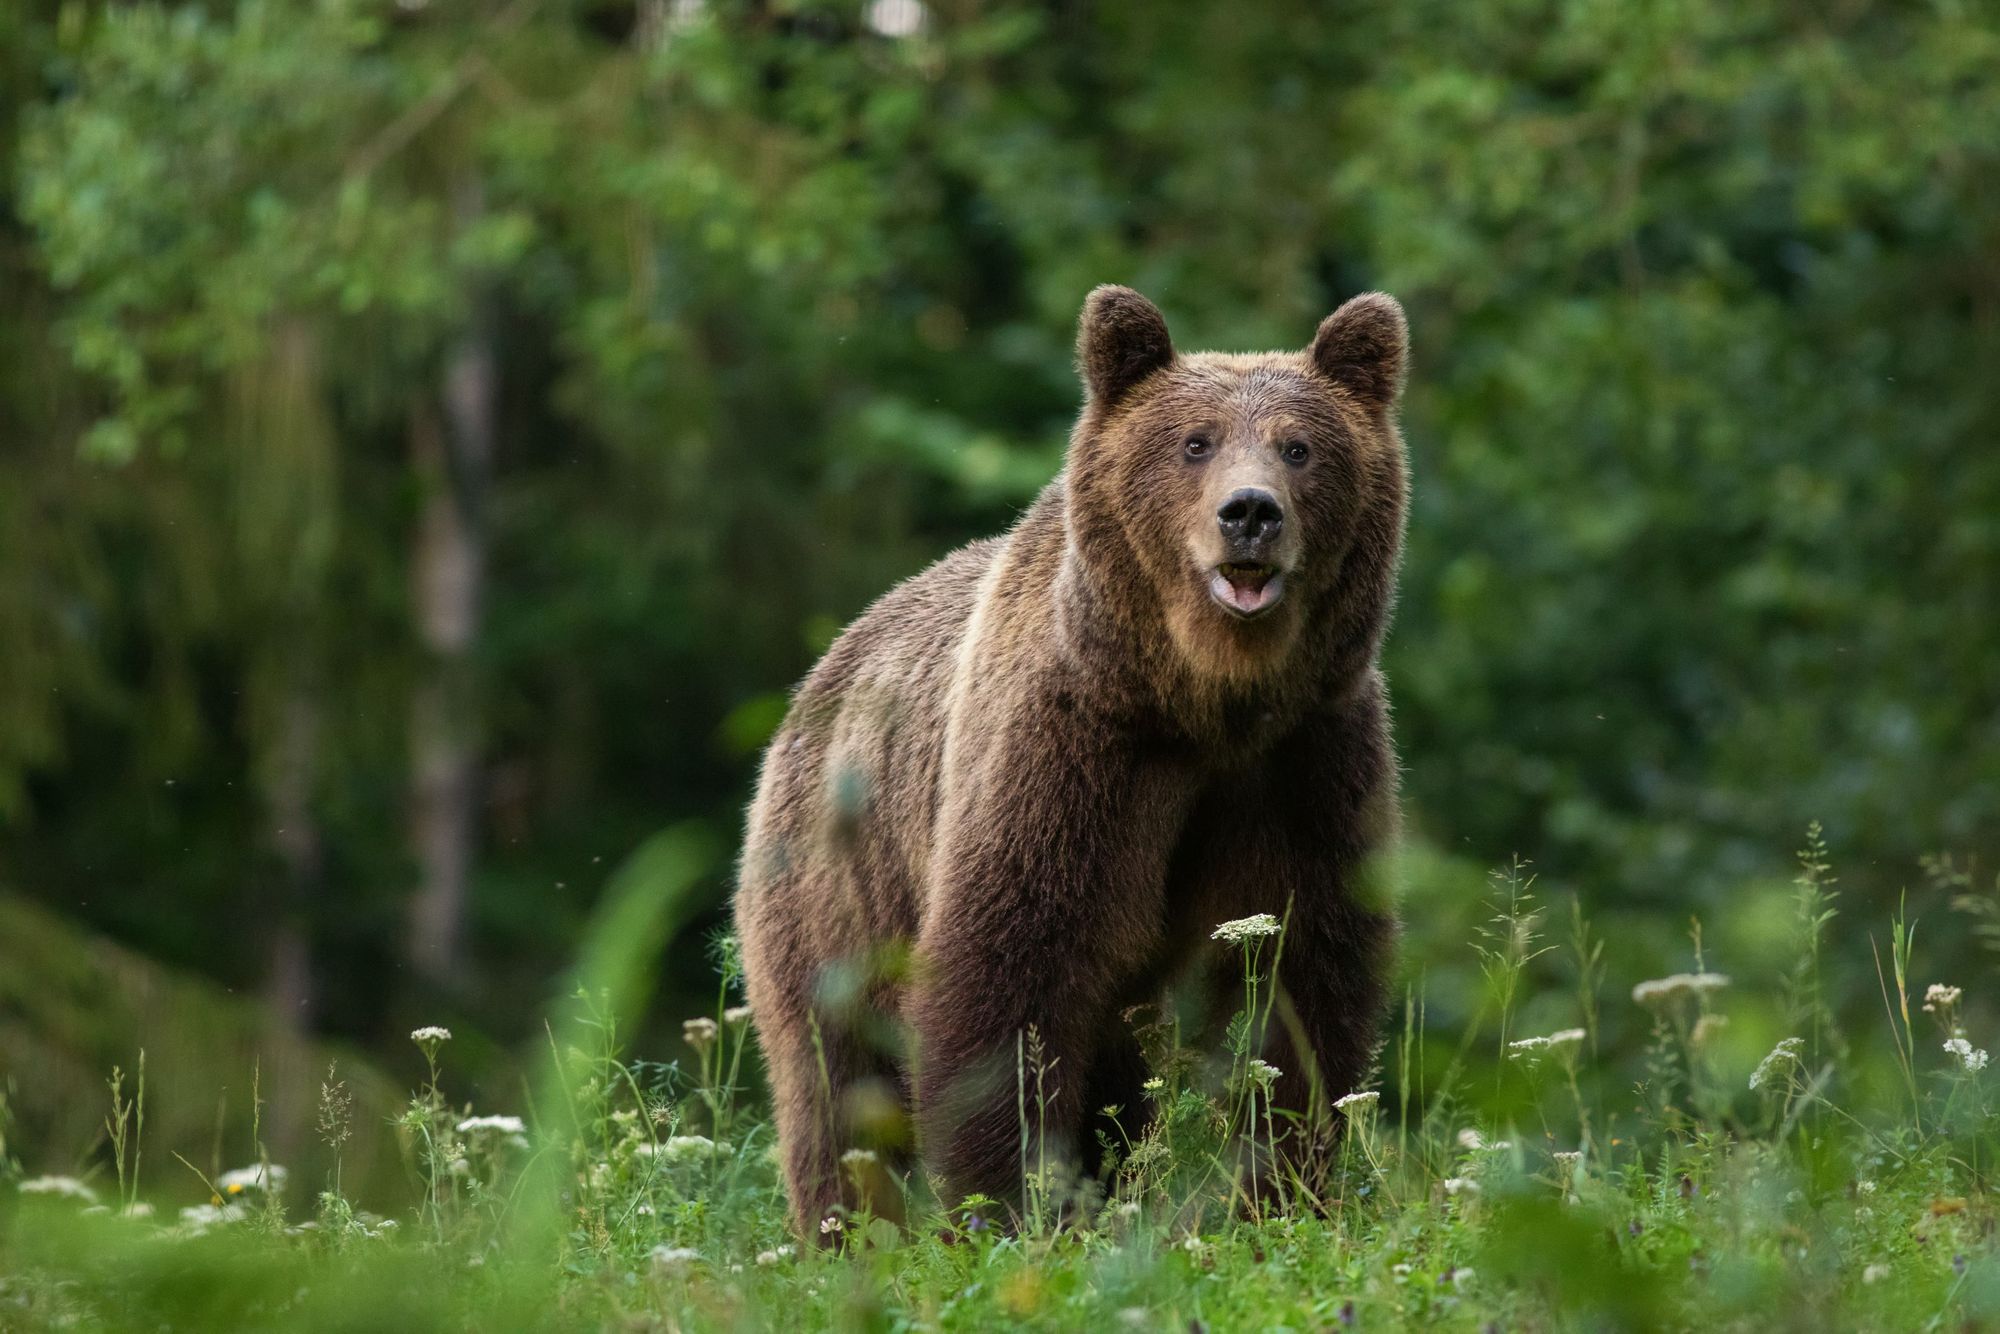 The majority of Europe's brown bear population can be found in the Carpathian Mountains of Romania. Photo: Getty